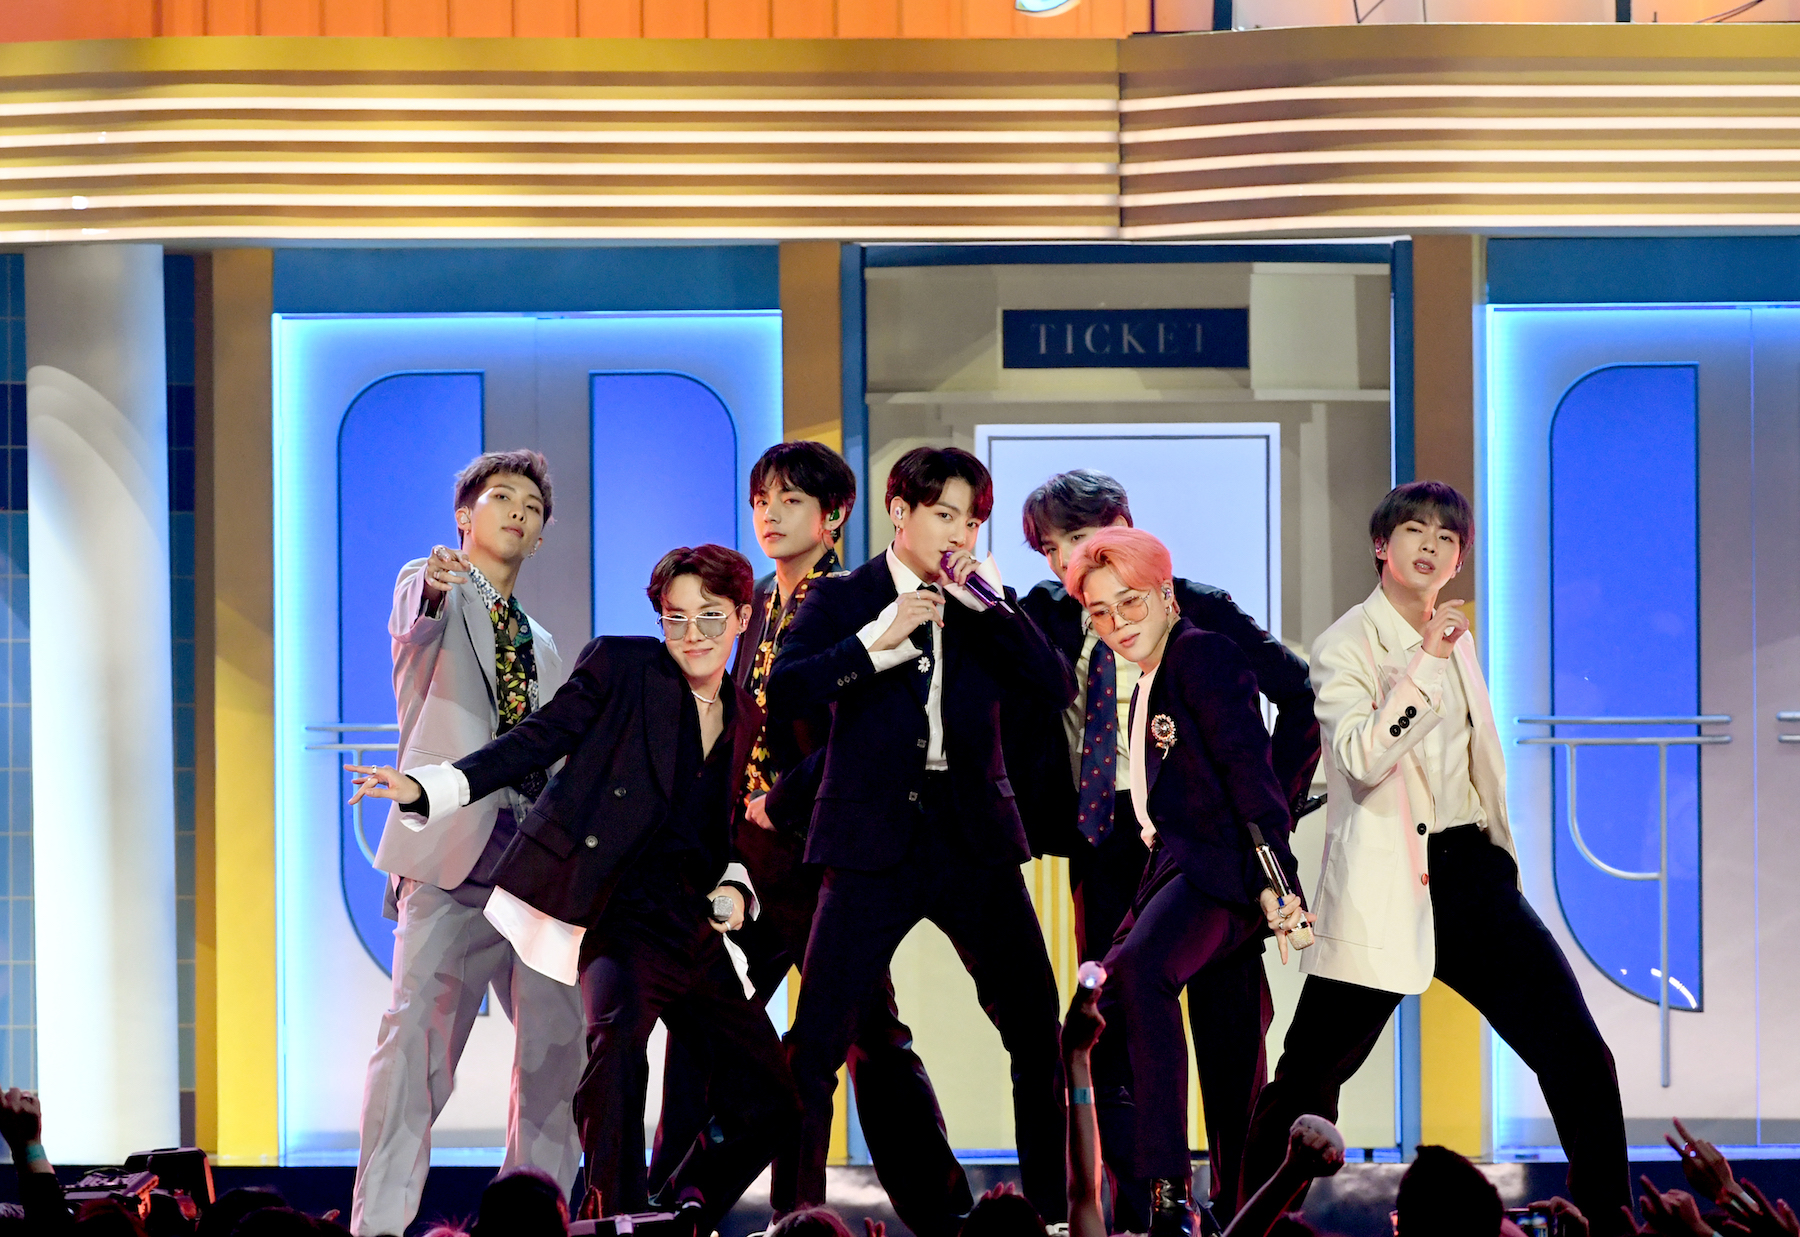 BTS perform onstage during the 2019 Billboard Music Awards